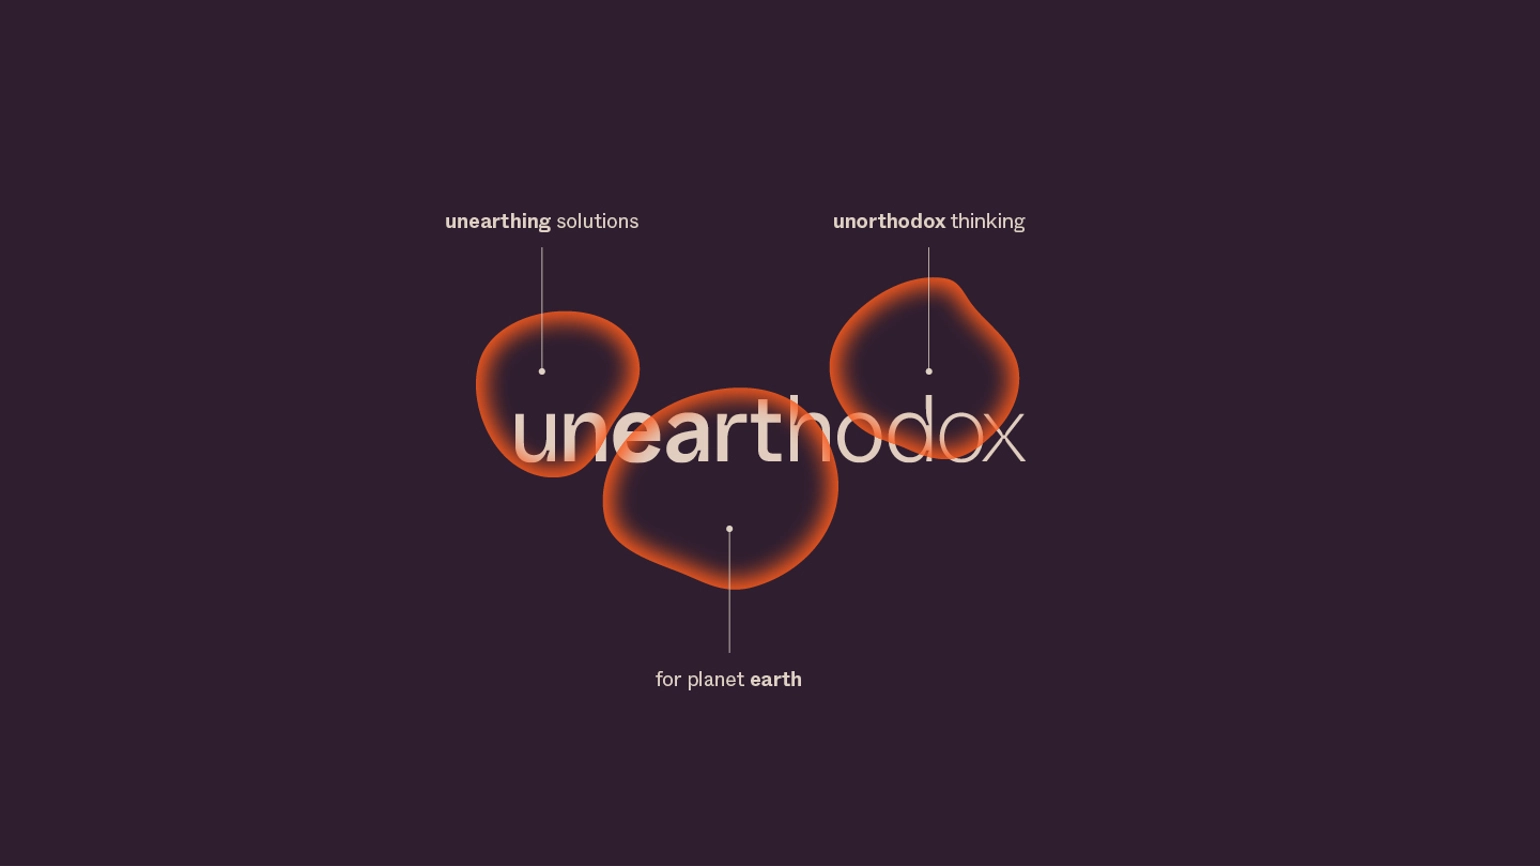 Unearthodox logo on dark purple background with orange circular waves, text reads 'uneathing solutions', 'for planet earth', 'unearthodox thinking'